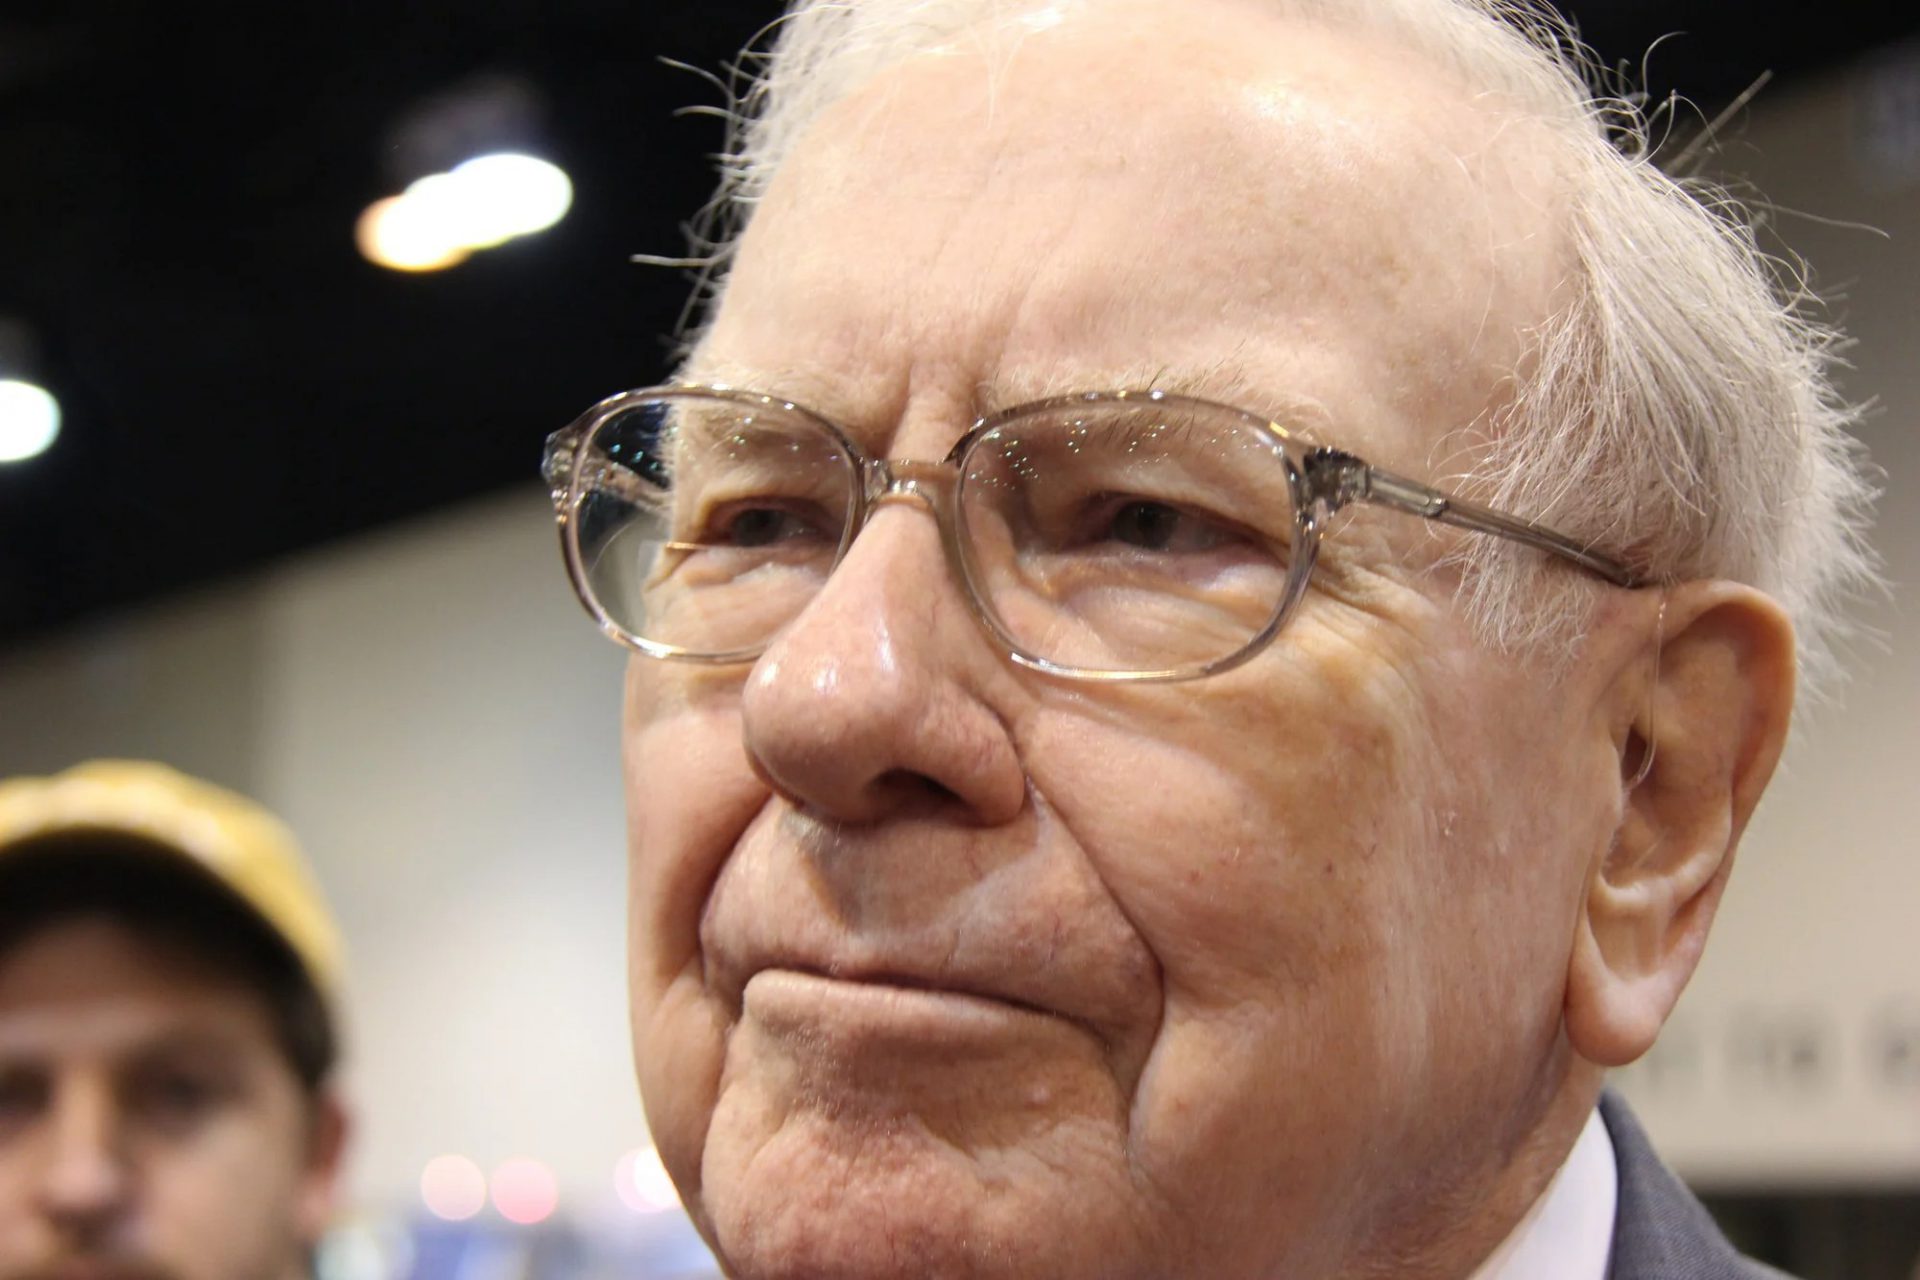 US Stock Market: Warren Buffet Buys This Stock Every Month For 5 Years